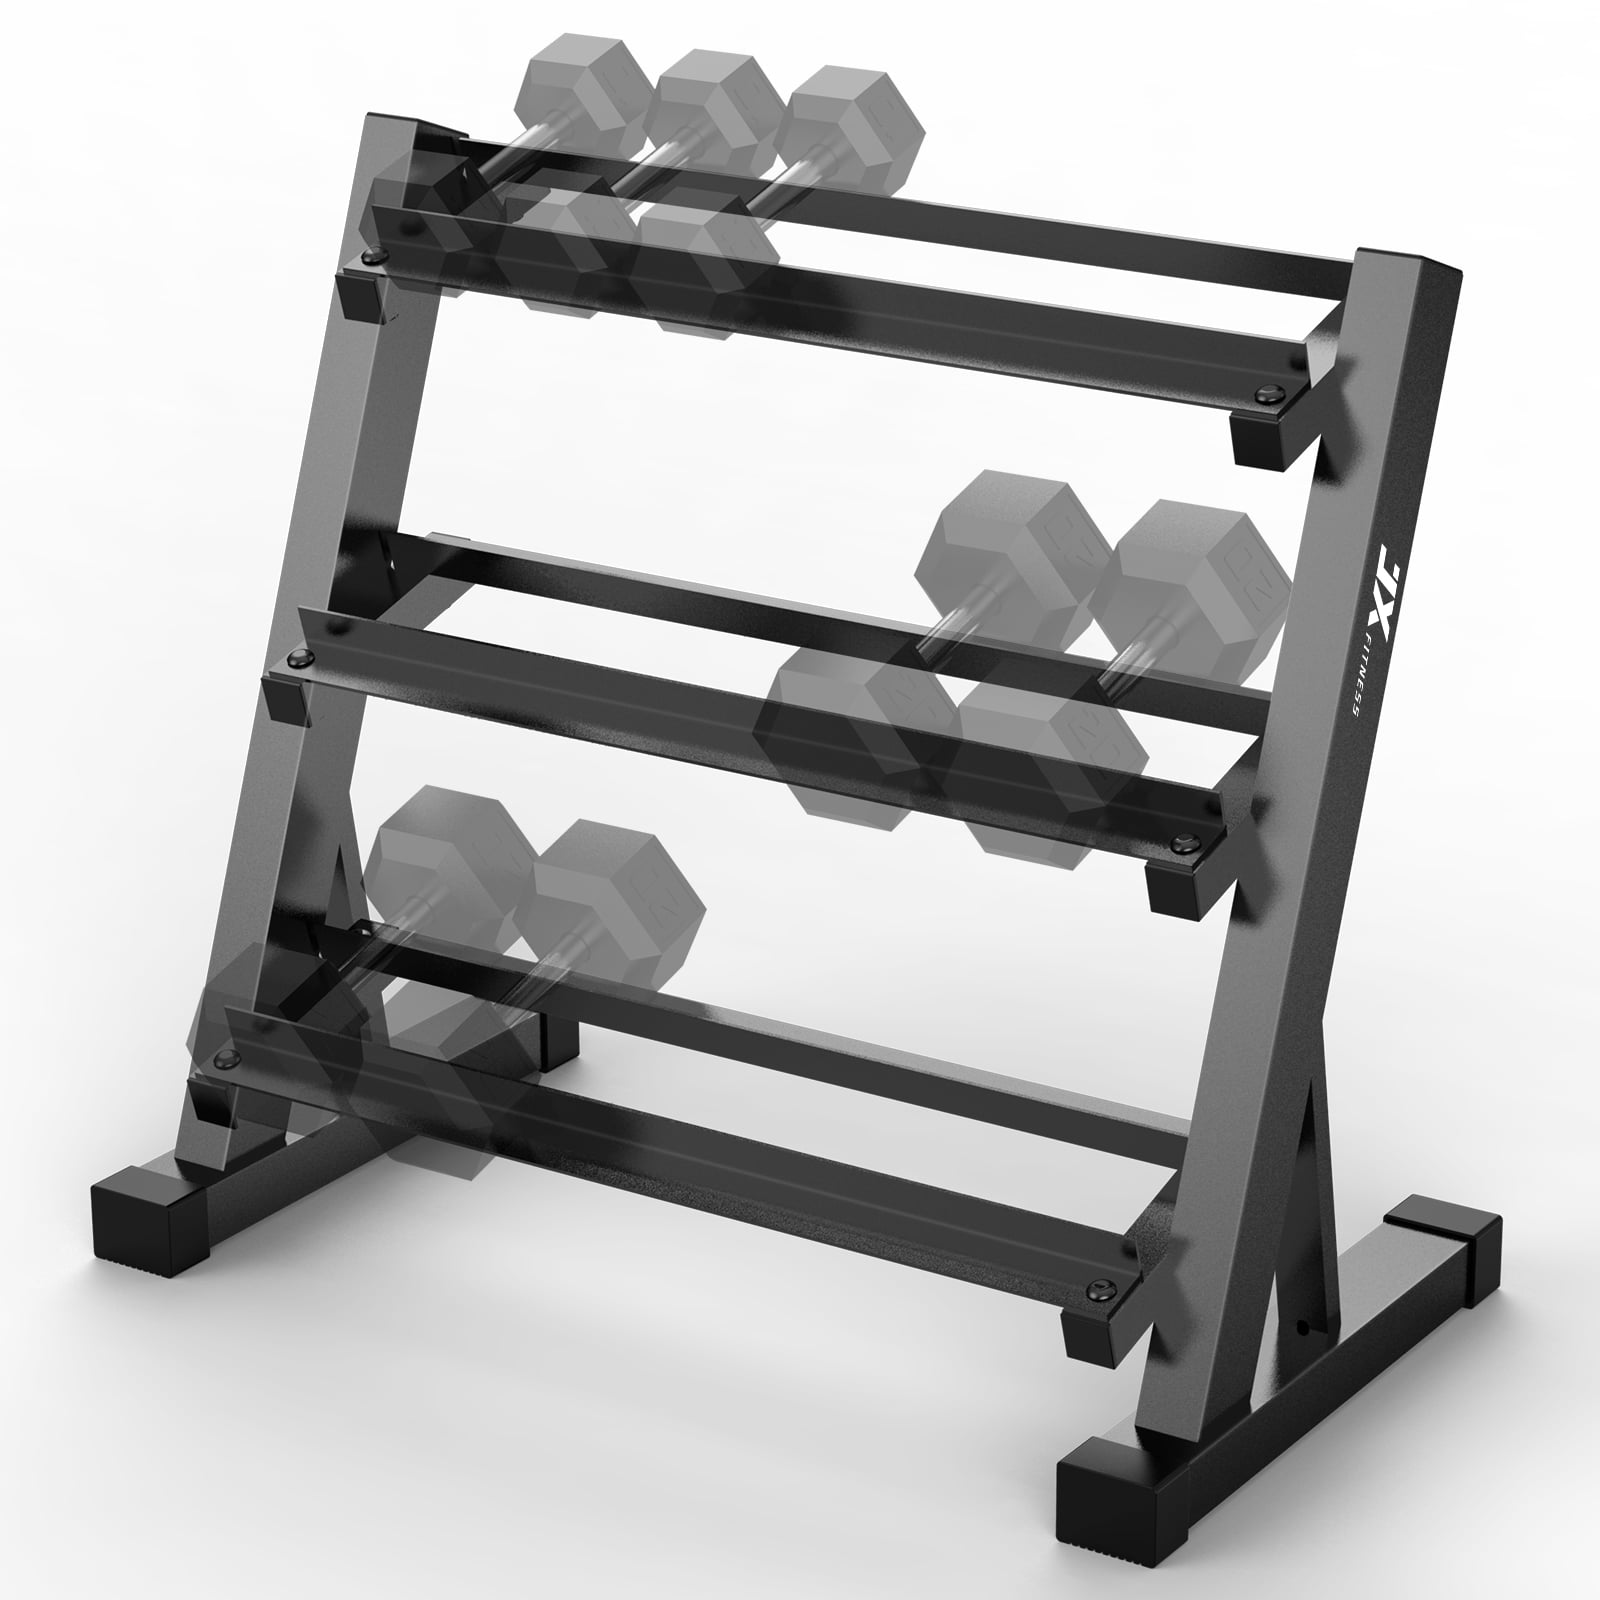 JX FITNESS Dumbbell Rack Stand Weight Rack Holders for home gym storage Rack Only 